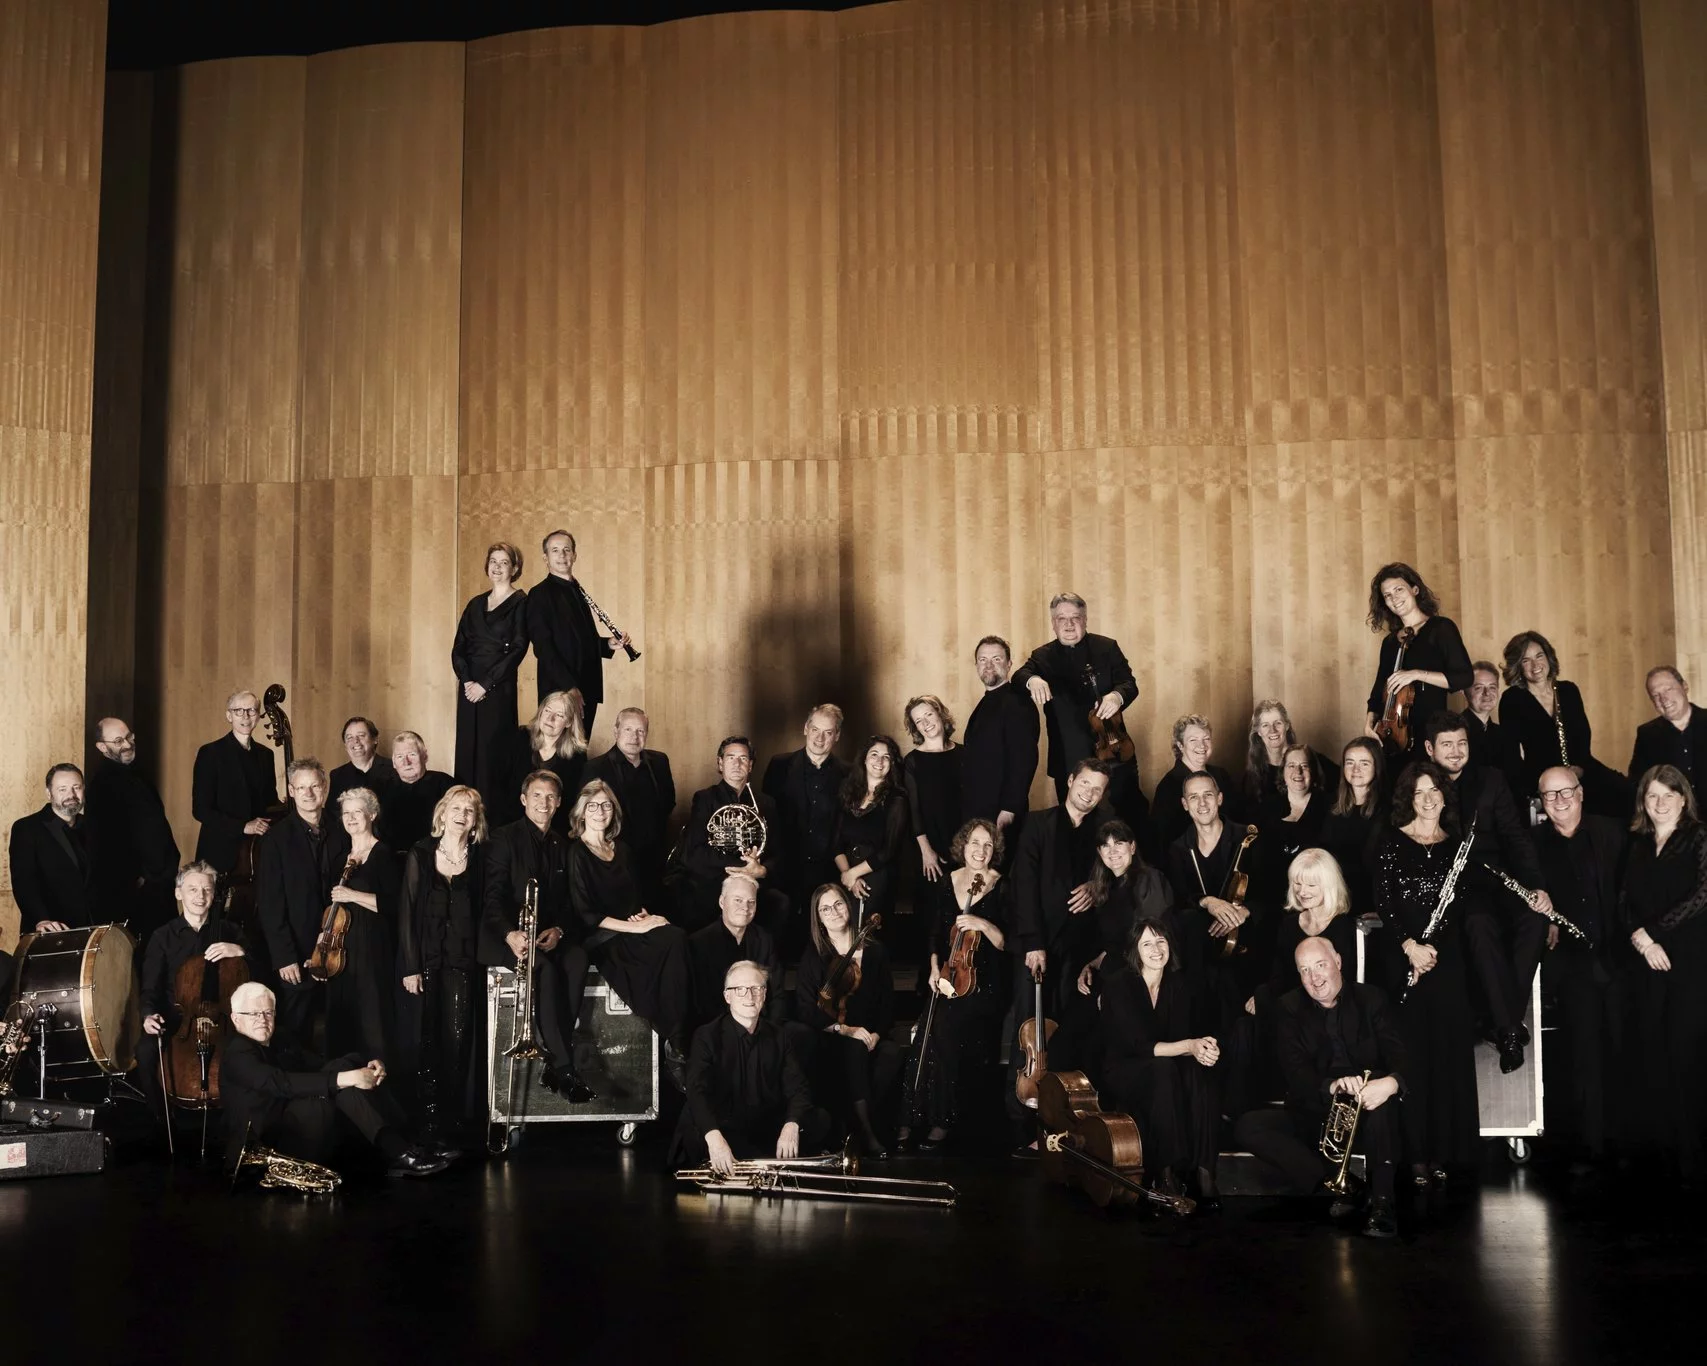 Group photo of an orchestra